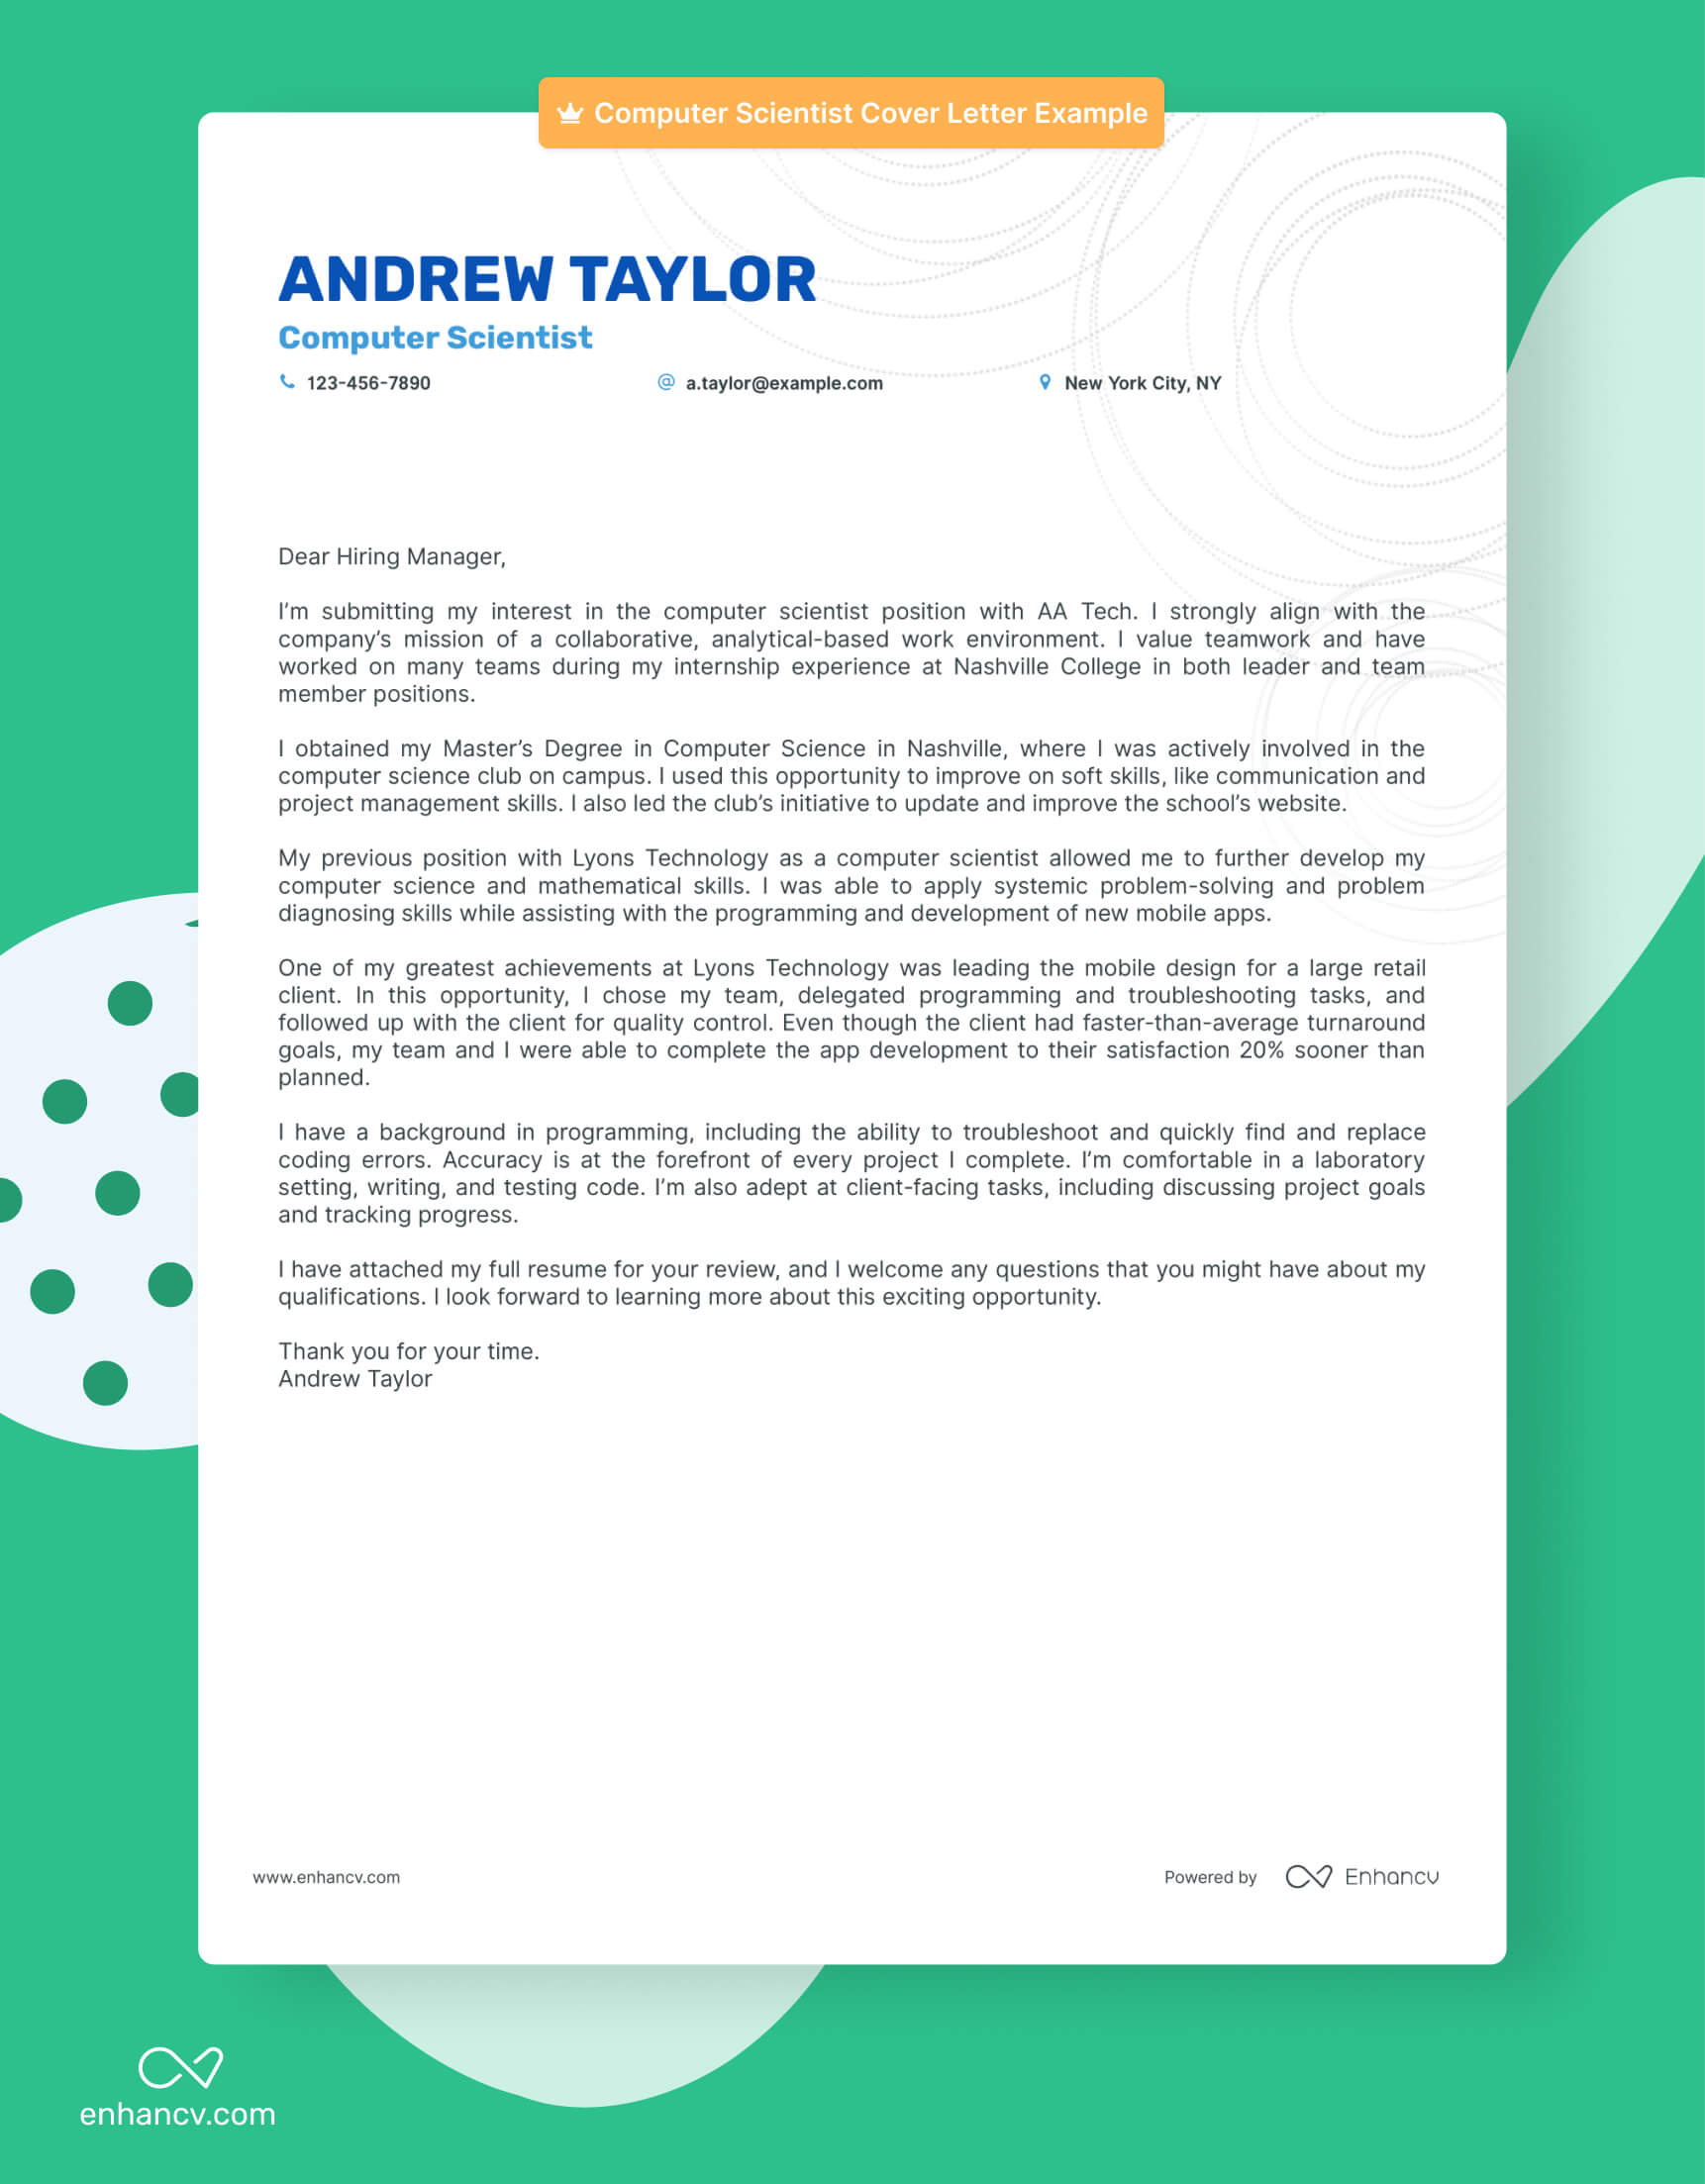 A cover letter example for a computer scientist position build with the Enhancv cover letter builder.